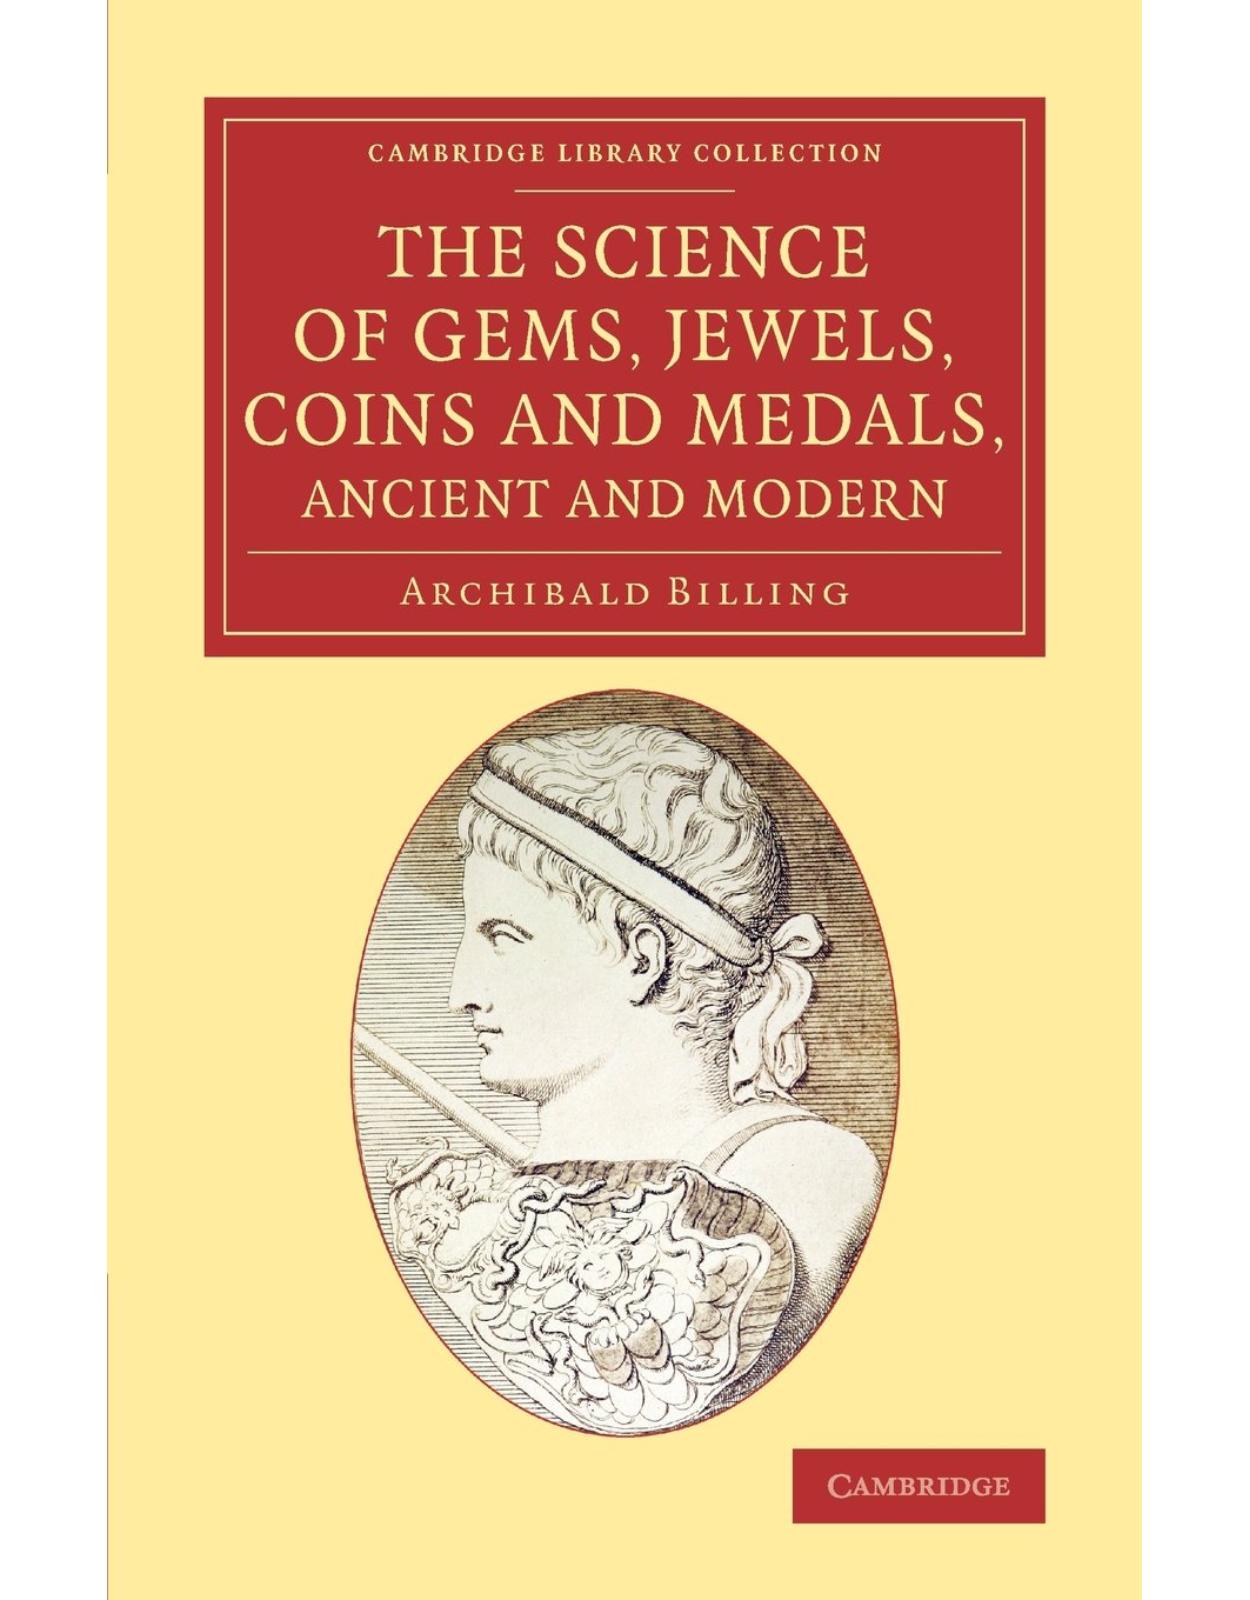 The Science of Gems, Jewels, Coins and Medals, Ancient and Modern (Cambridge Library Collection - Art and Architecture)